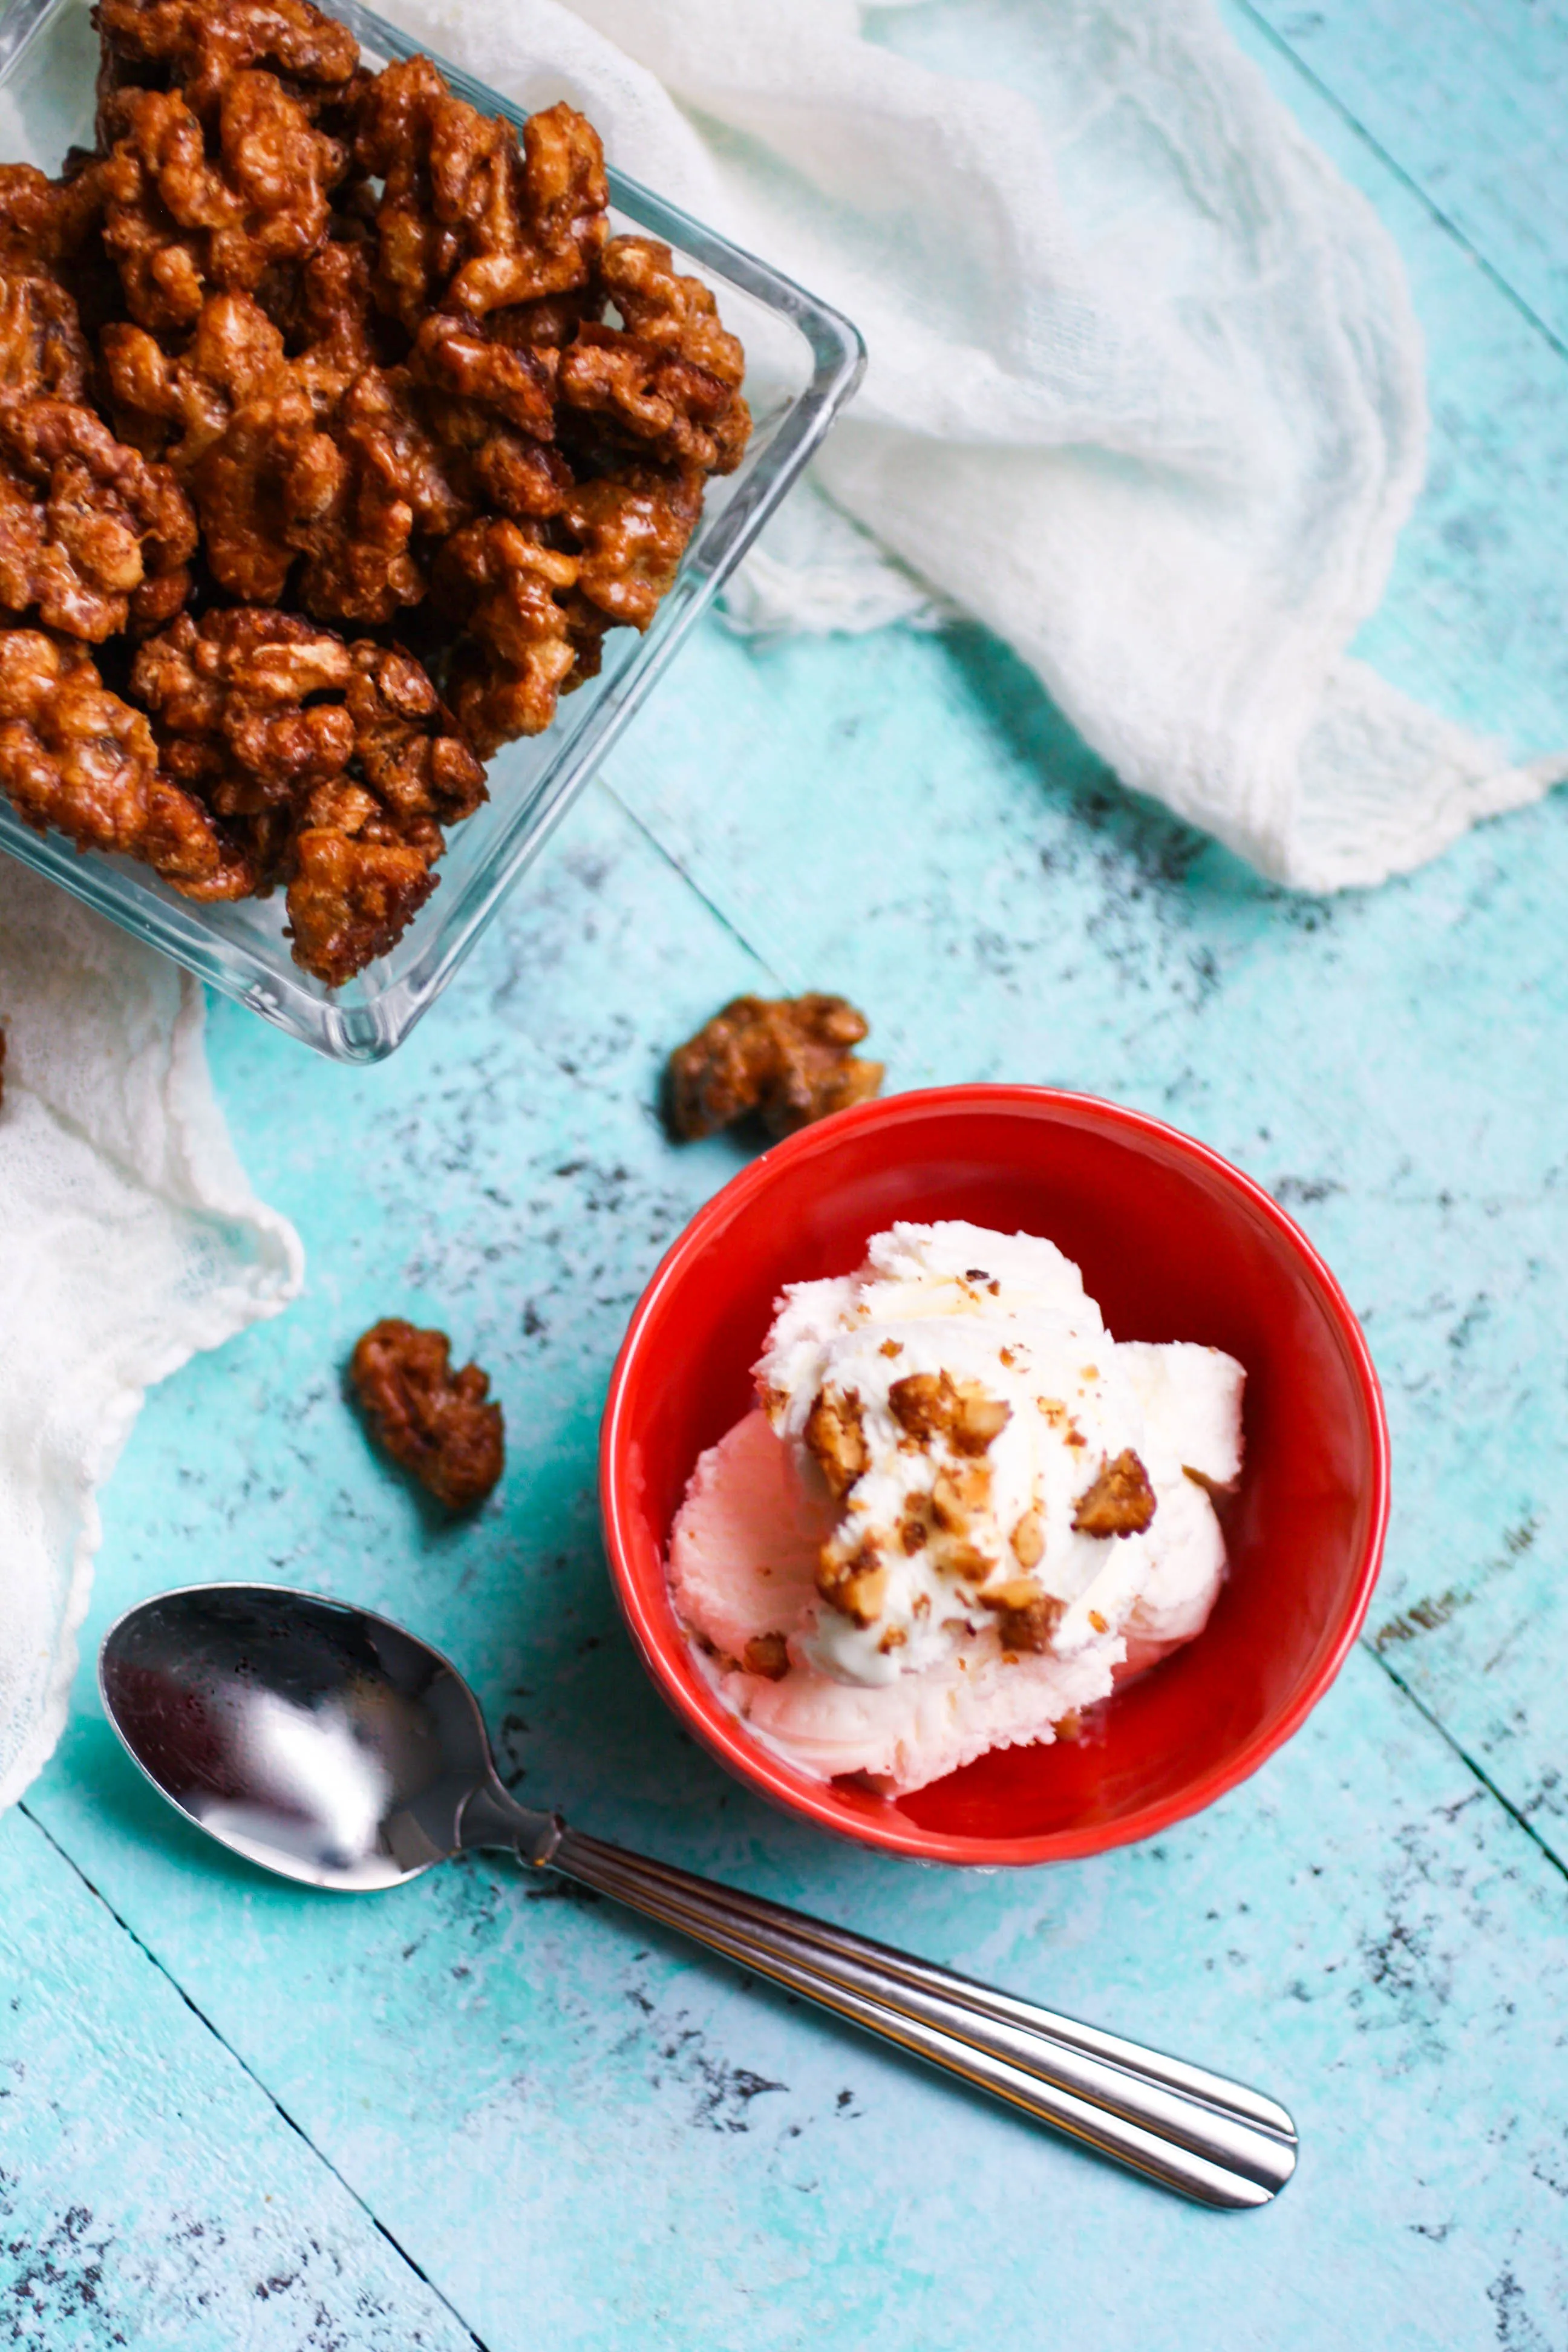 Sweet, Spicy & Smoky Candied Walnuts are fabulous in a salad, but I like them sprinkled over ice cream, too! These candied walnuts are a tasty snack, and a lovely gift to give.